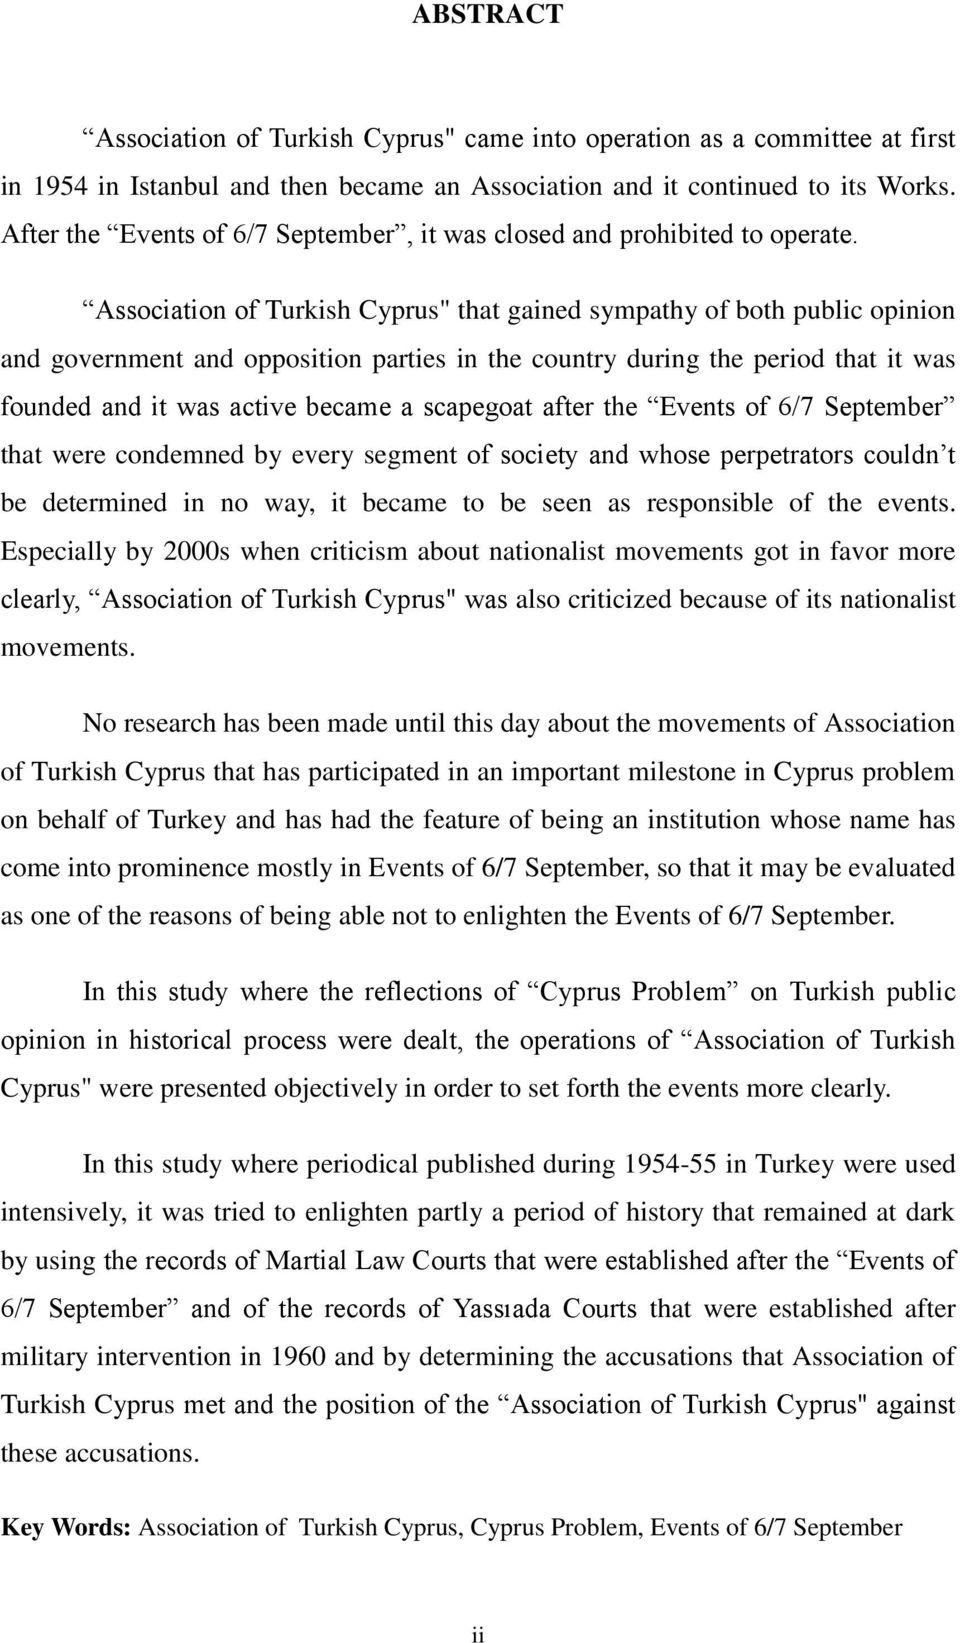 Association of Turkish Cyprus" that gained sympathy of both public opinion and government and opposition parties in the country during the period that it was founded and it was active became a